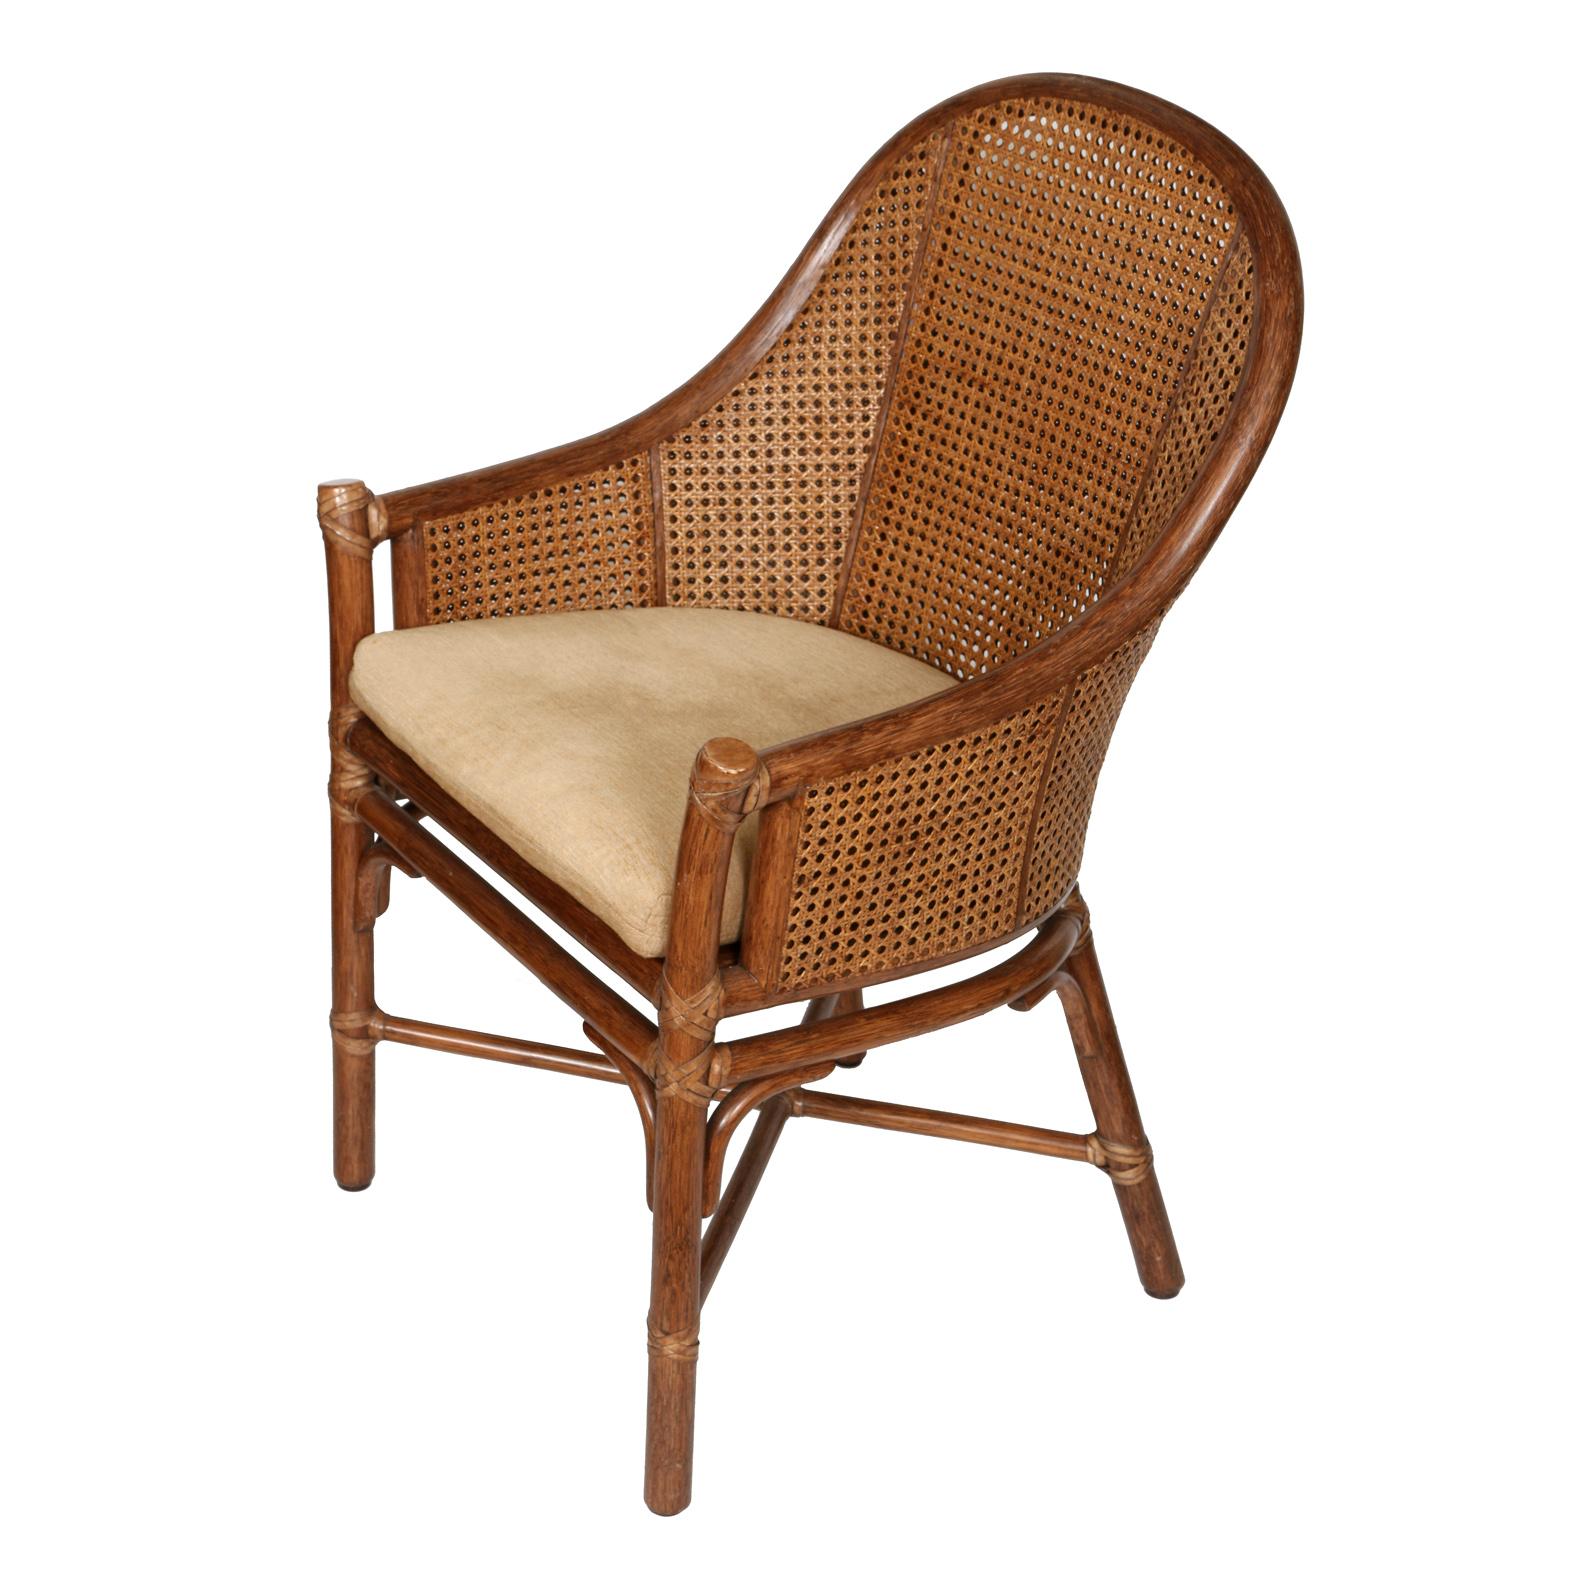 Pair of vintage McGuire bamboo bucket chairs with caned back and sides and cushioned seat.